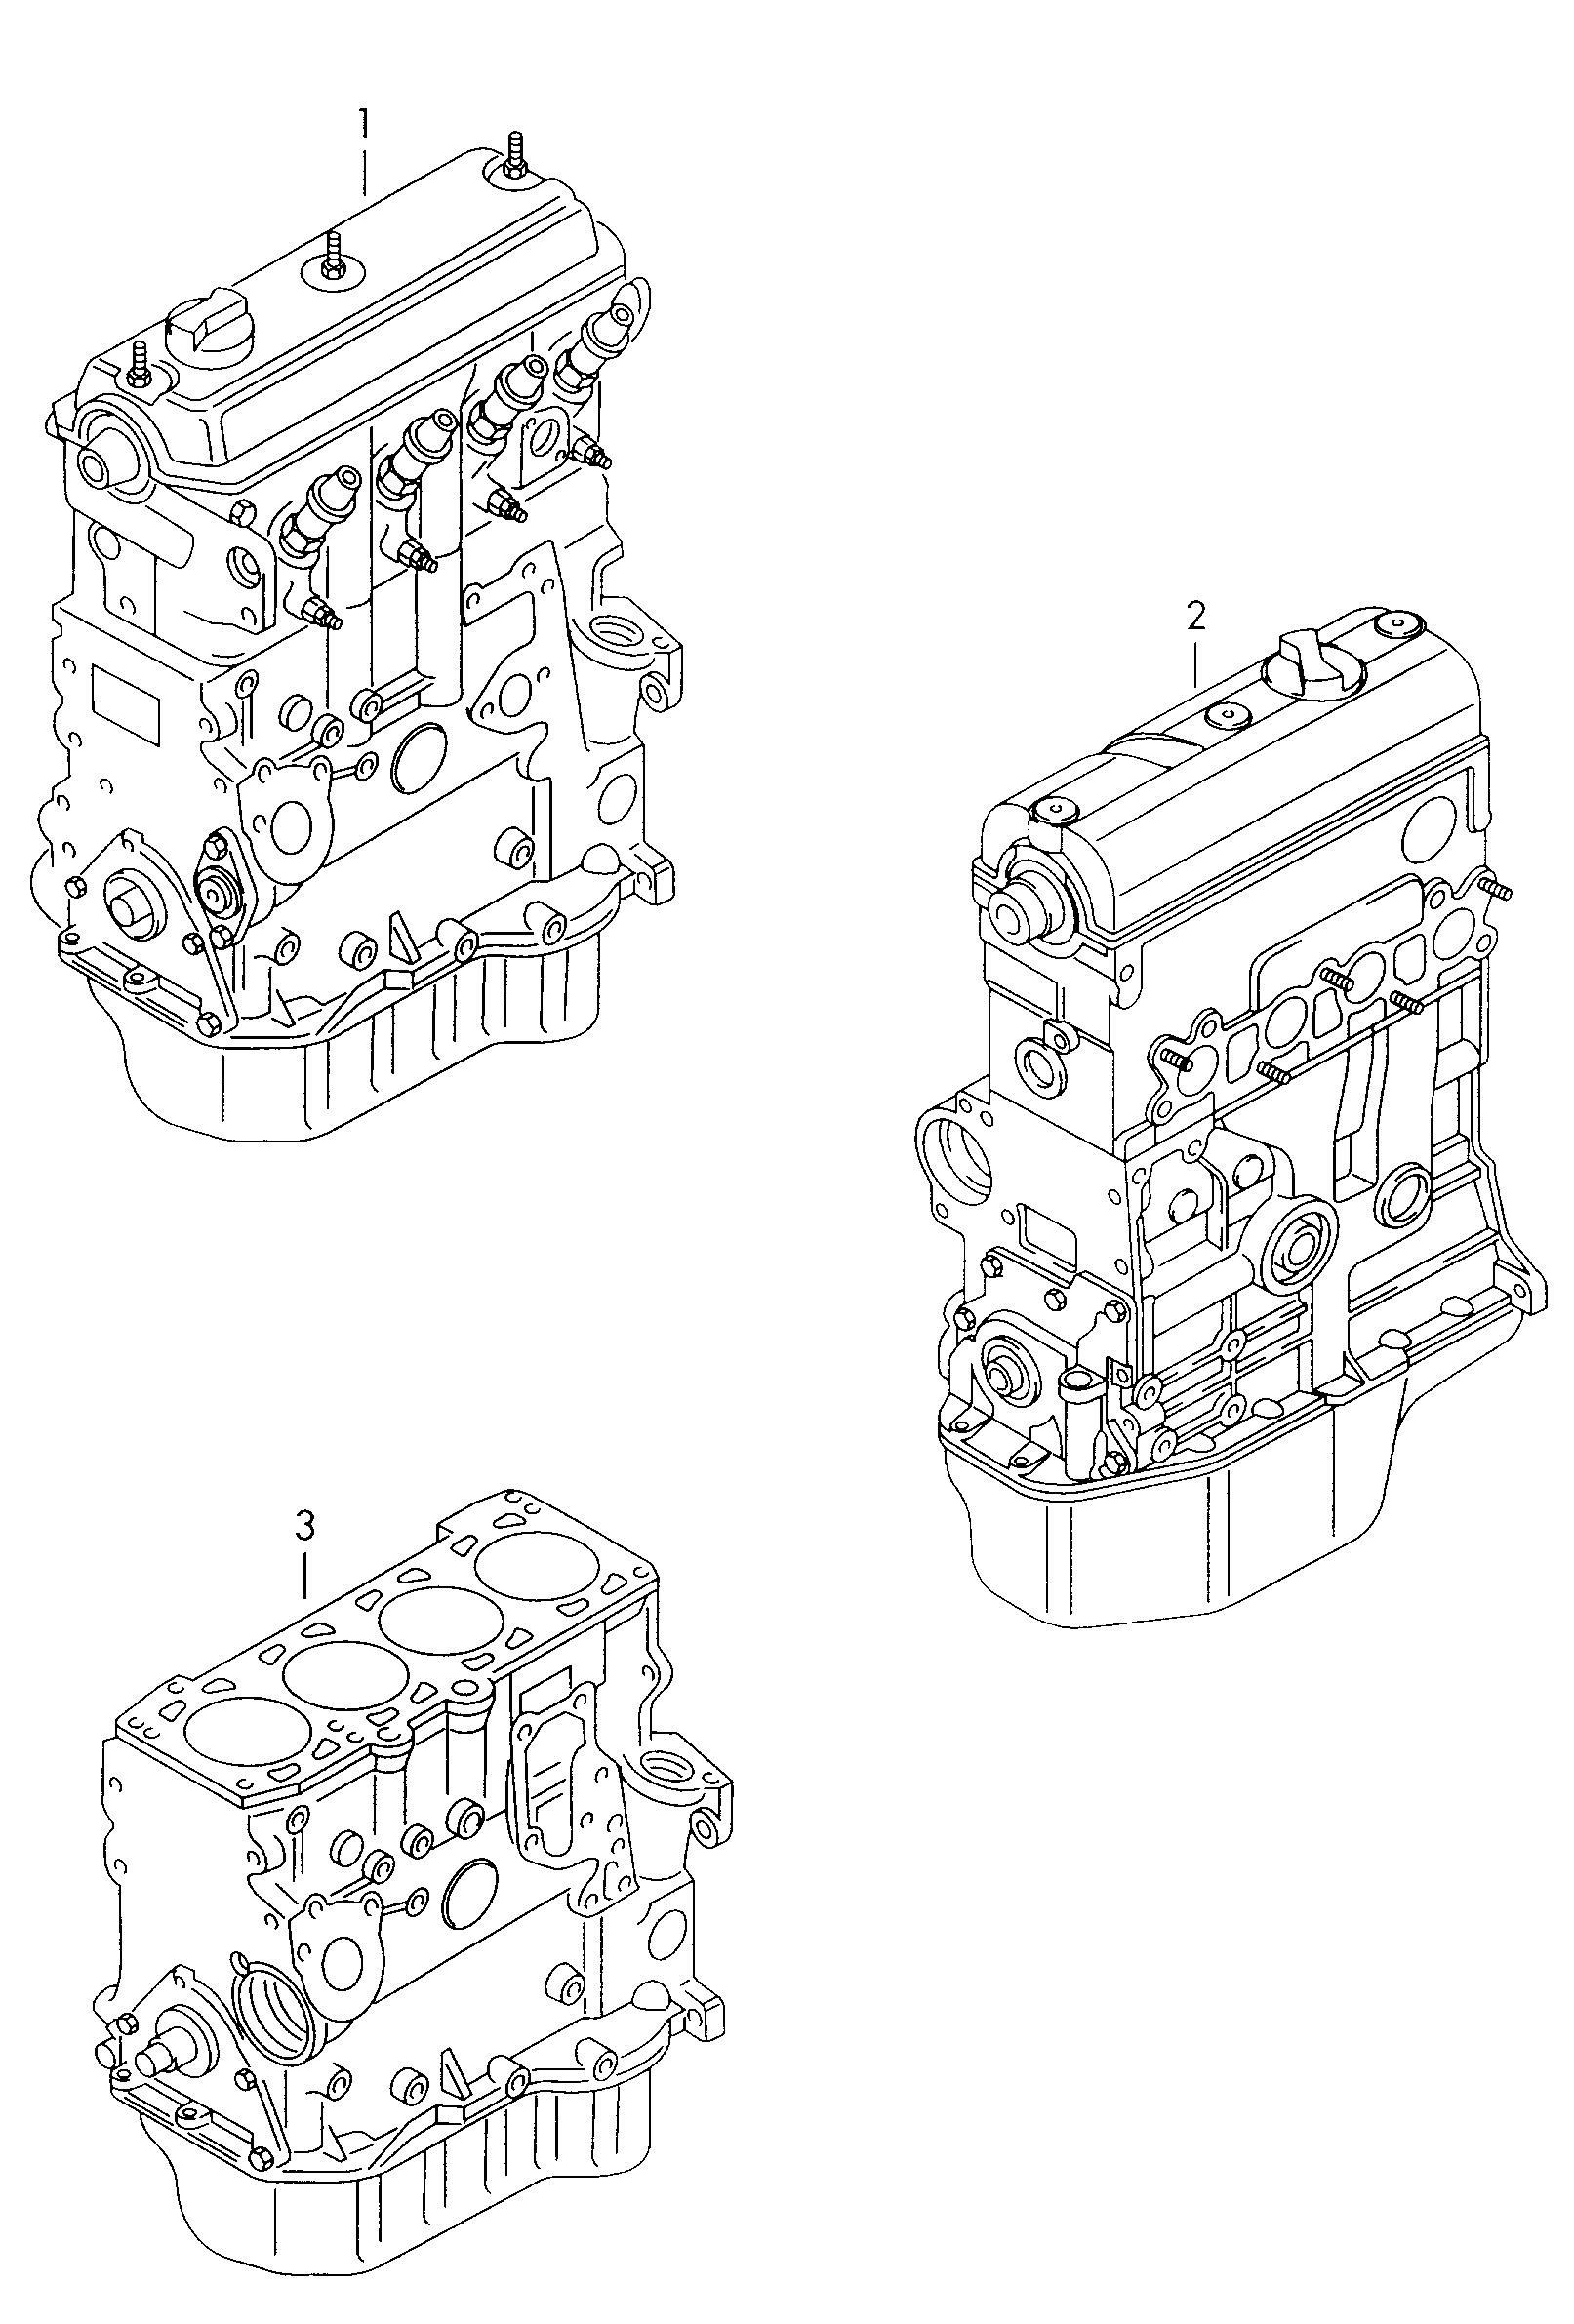 short engine with crankshaft,<br>pistons, oil pump and oil sump  - Roomster - ro